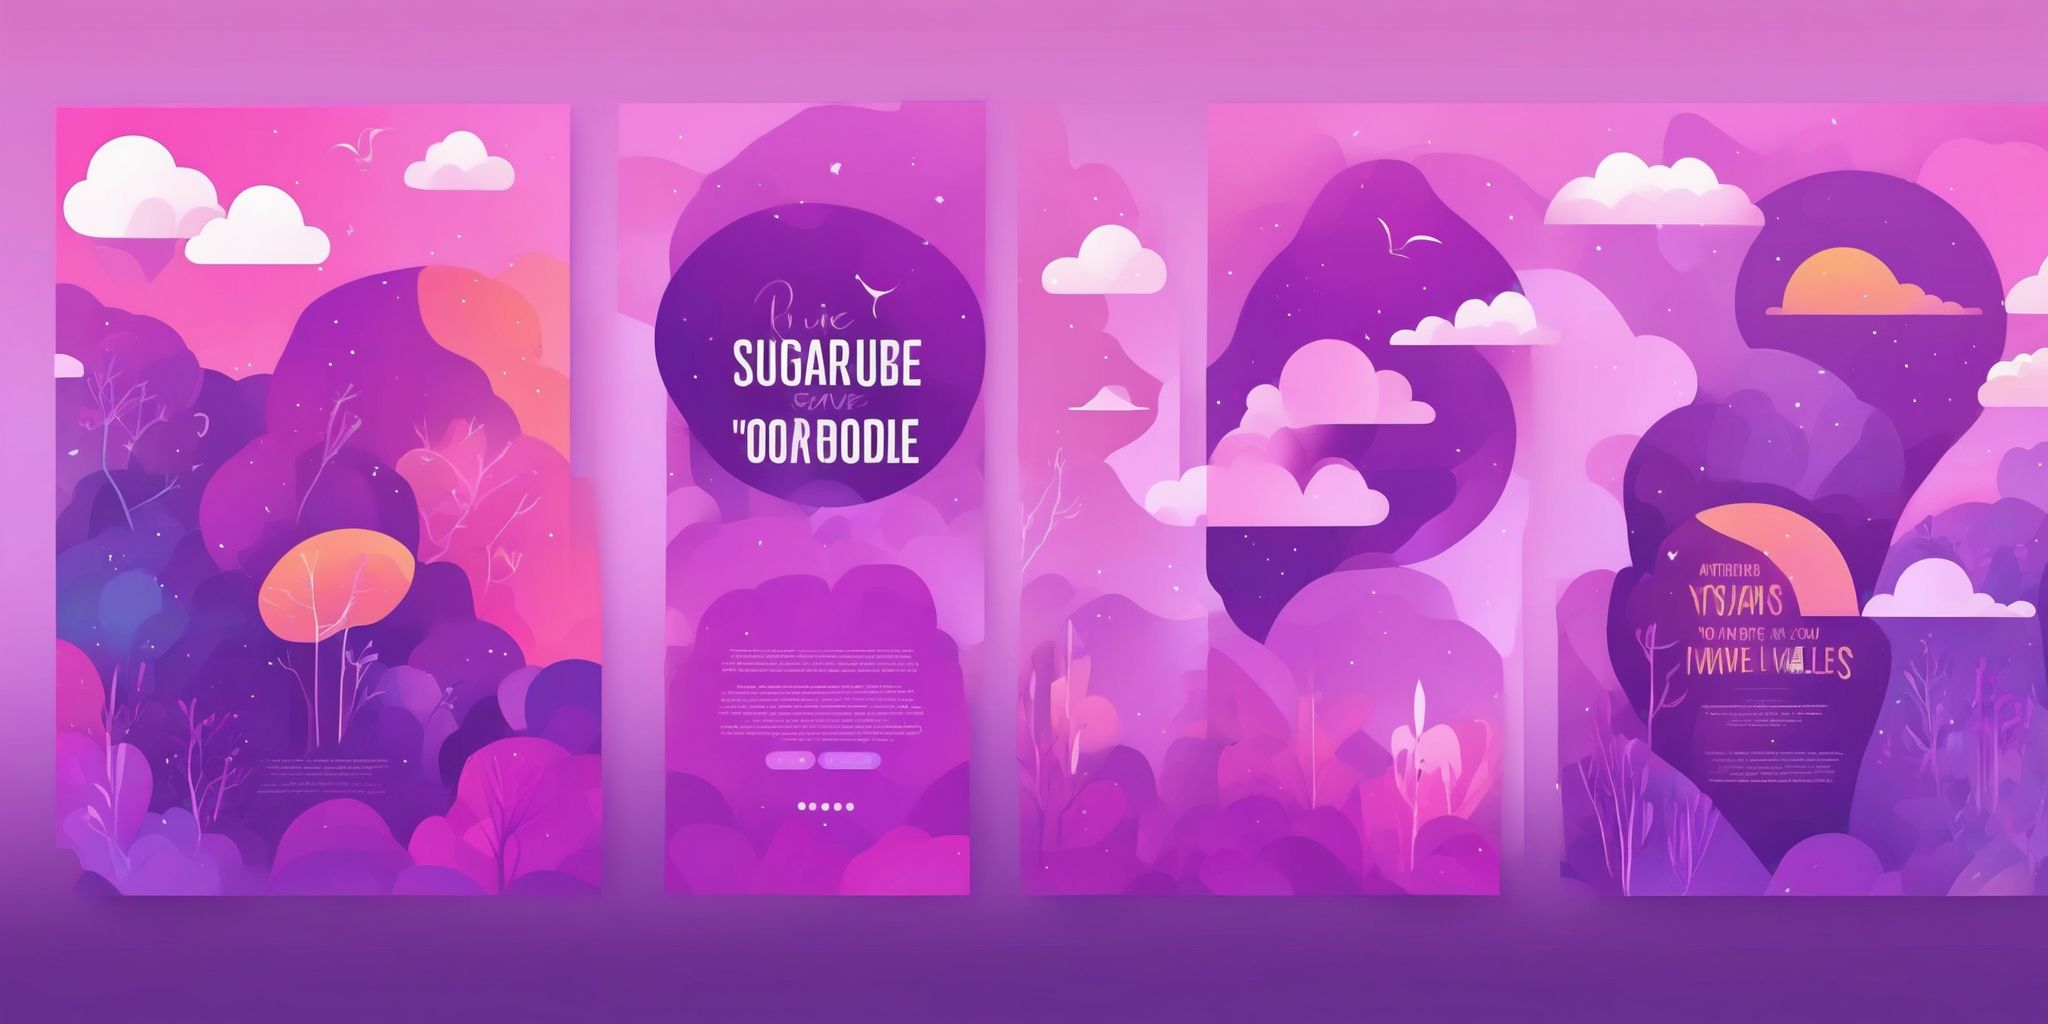 Quotes in flat illustration style, colorful purple gradient colors